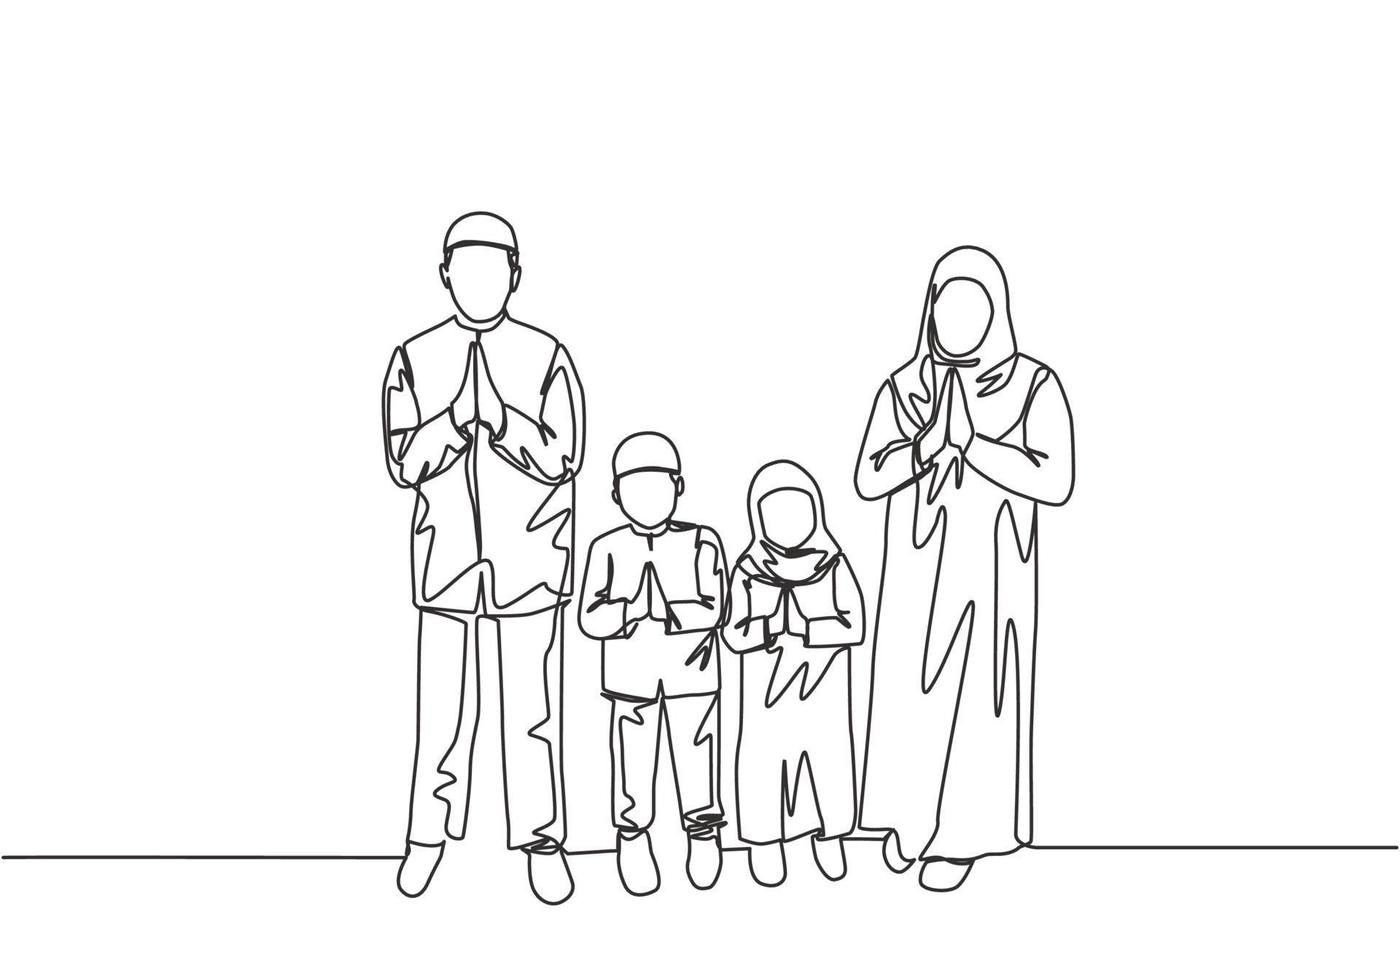 Eid Mubarak greeting card, poster and banner design background. Single continuous line drawing of muslim Arabian family - mom, dad and two kids. Eid Al Fitr one line draw vector illustration